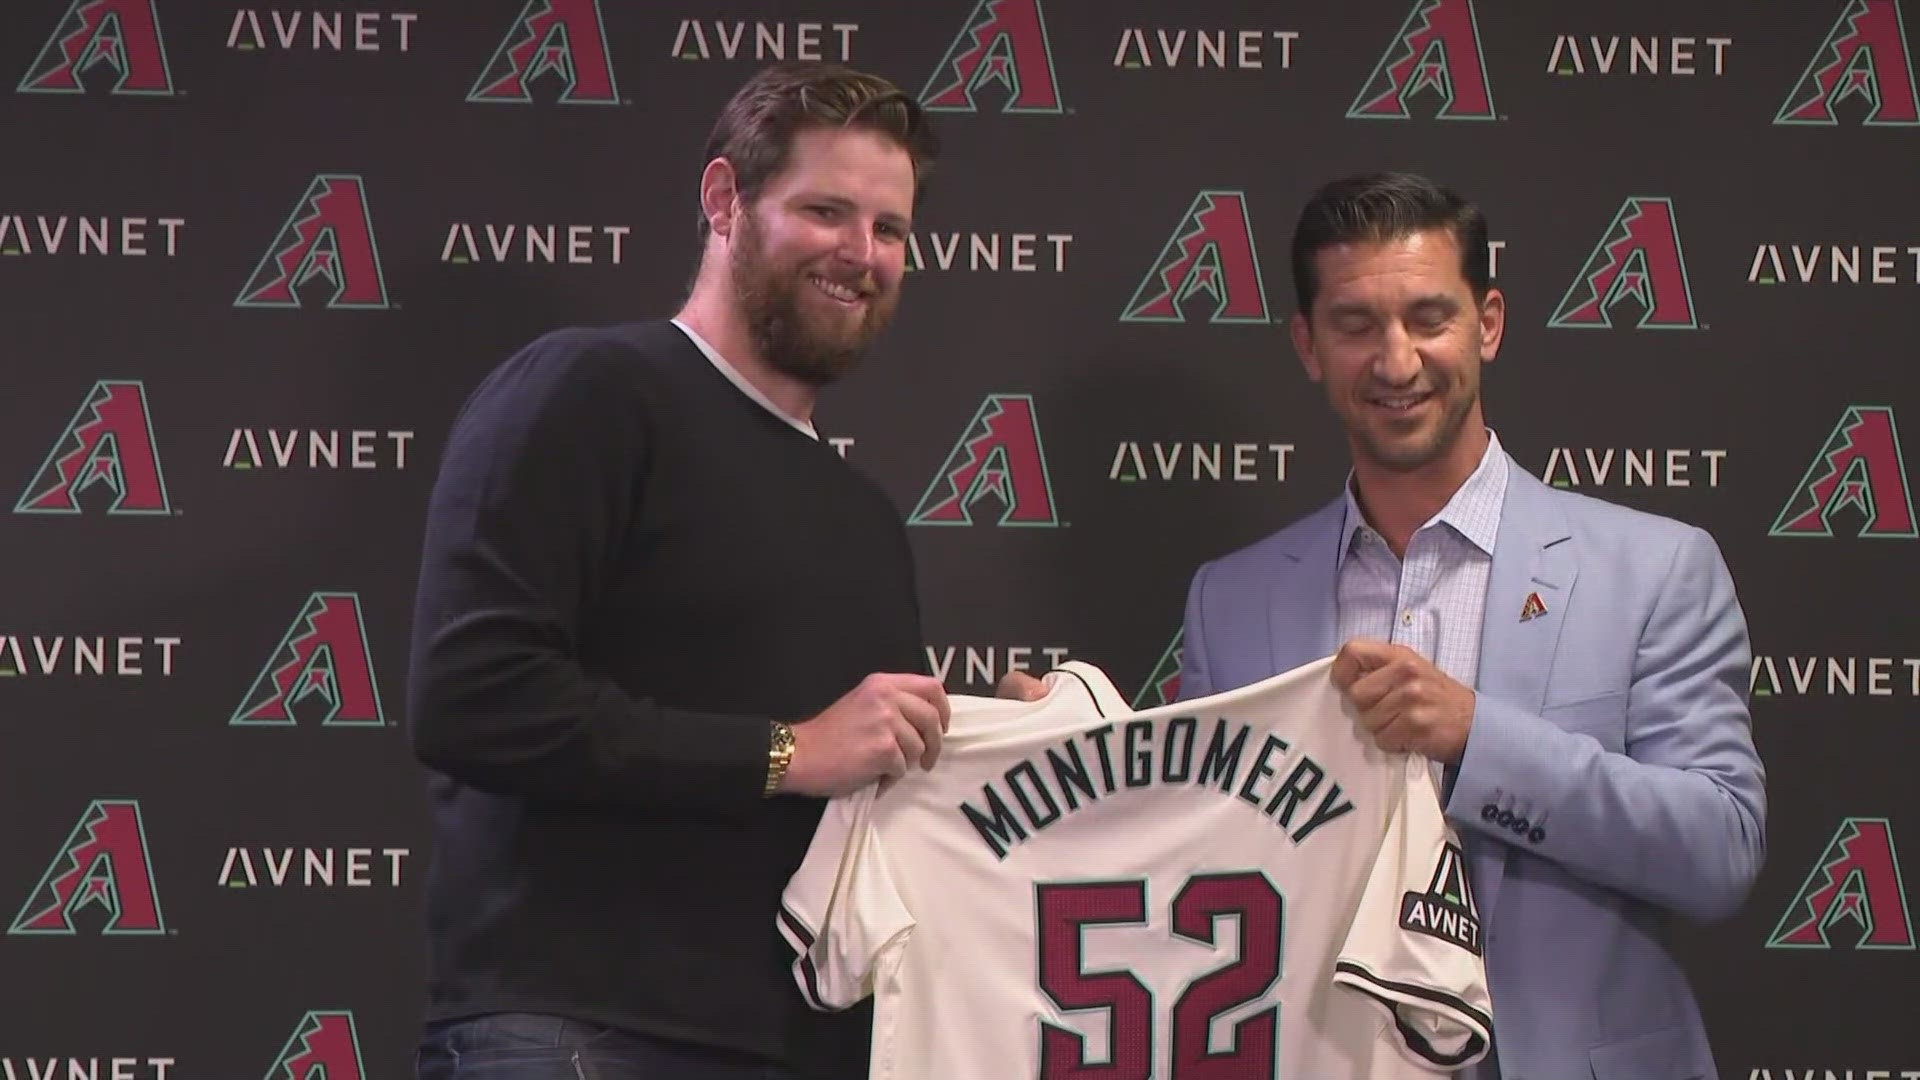 The team introduced their newest starting pitcher today.